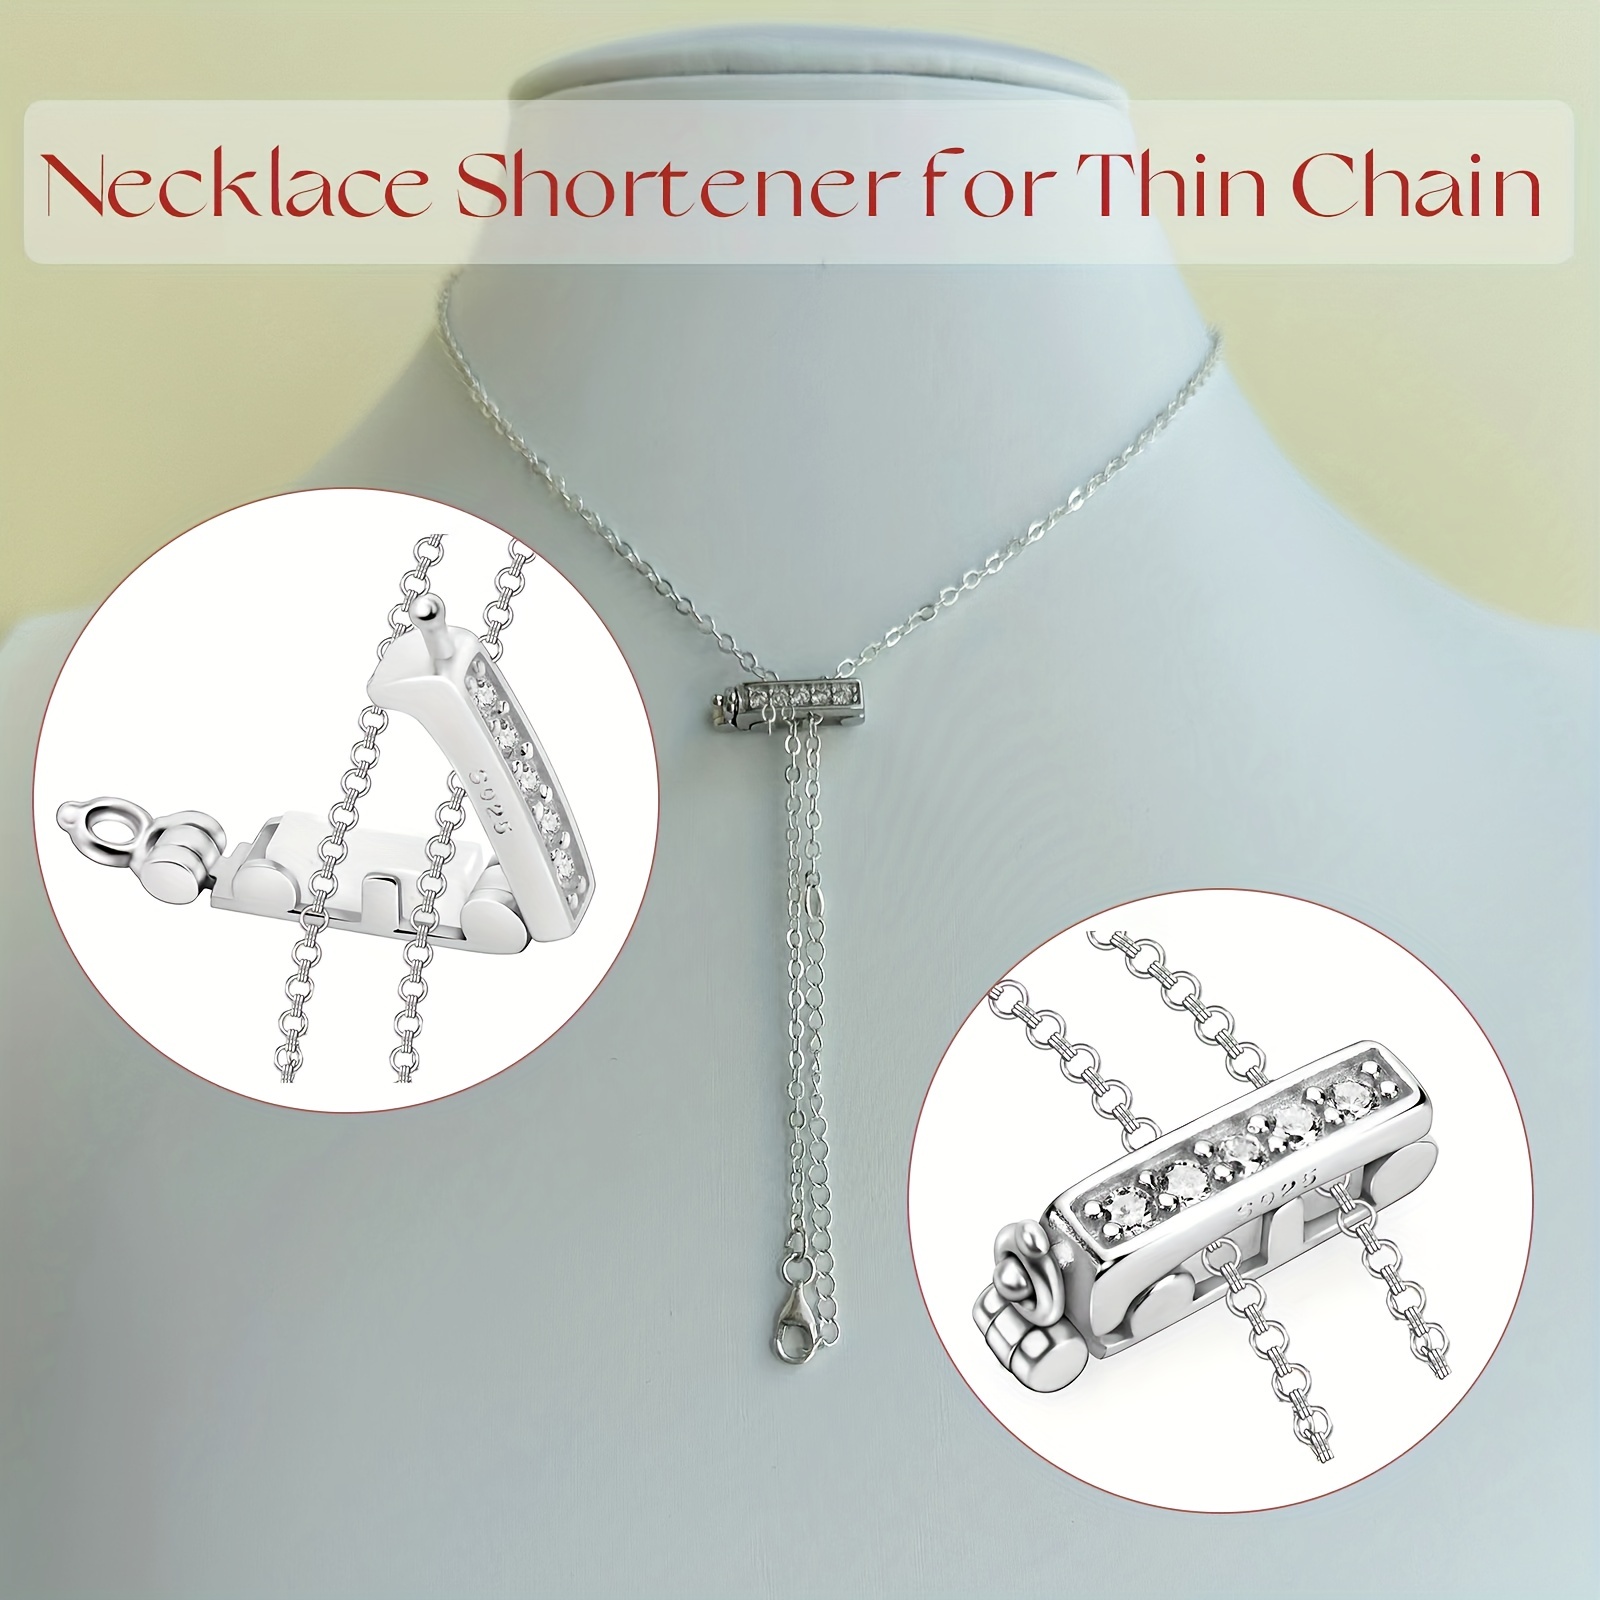 Necklace Shortener for Thin Chains 